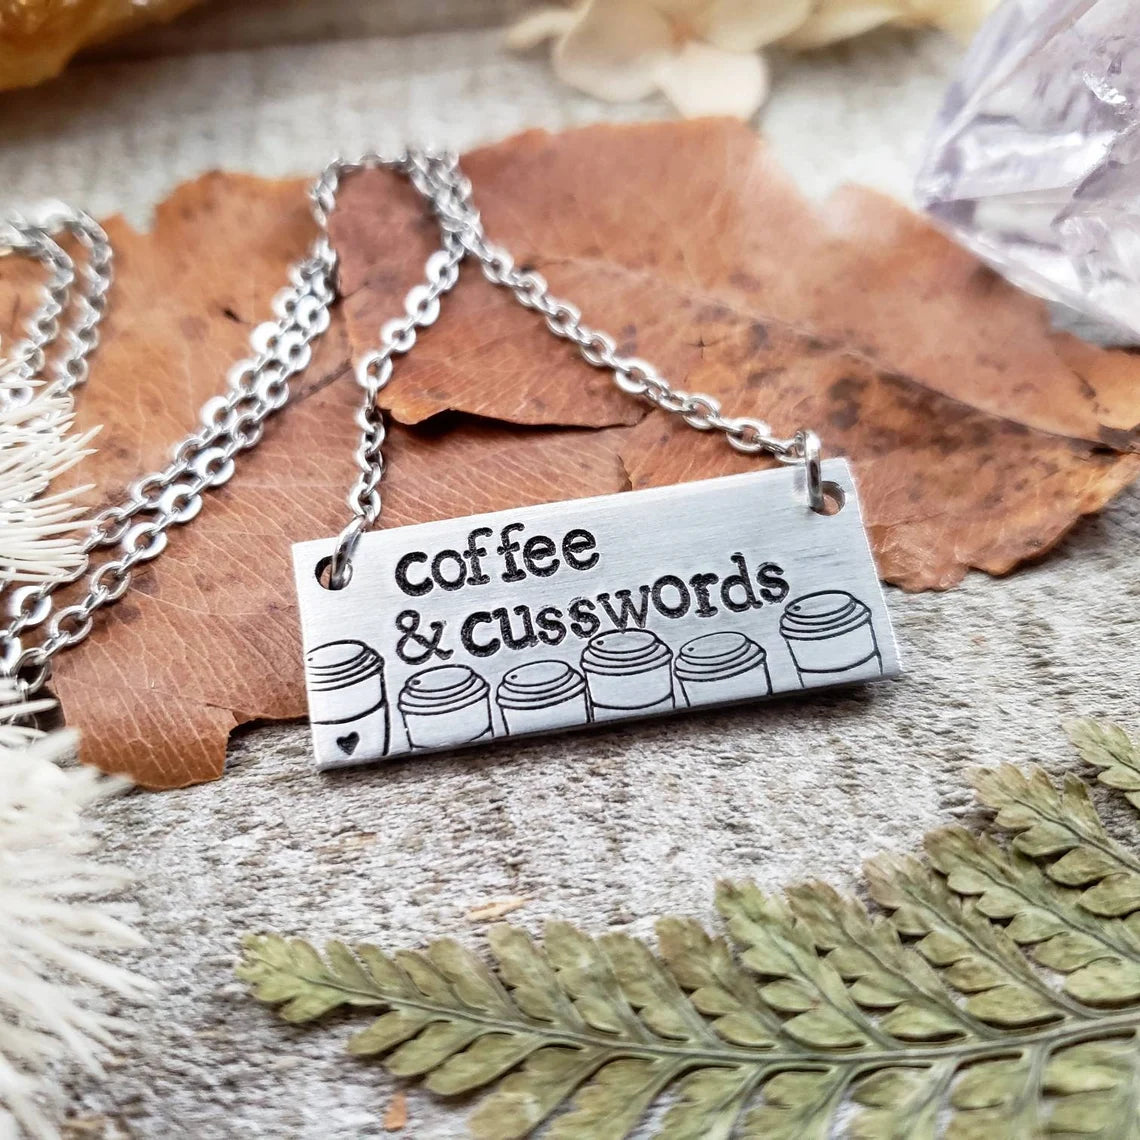 Coffee & Cuss words necklace